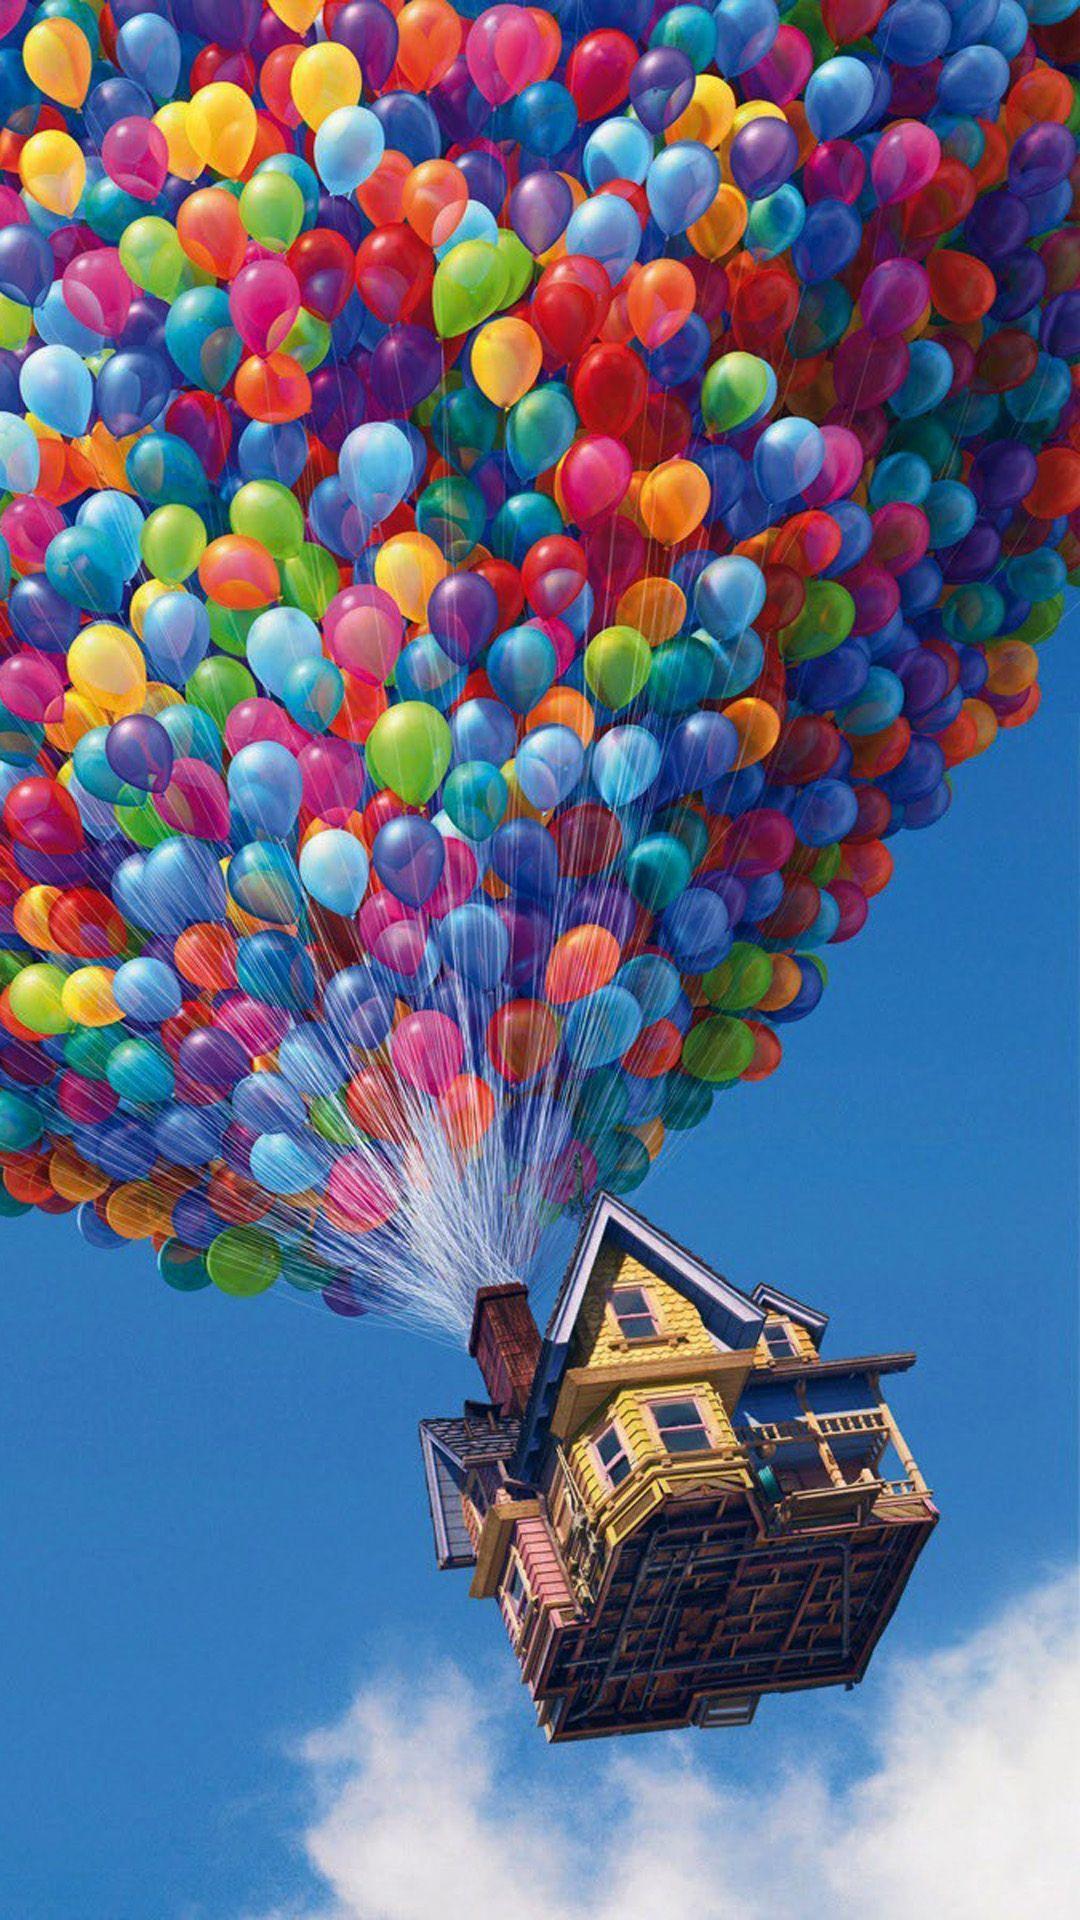 jpg, photo, iphone, wallpaper, balloons, smartphone, colorful